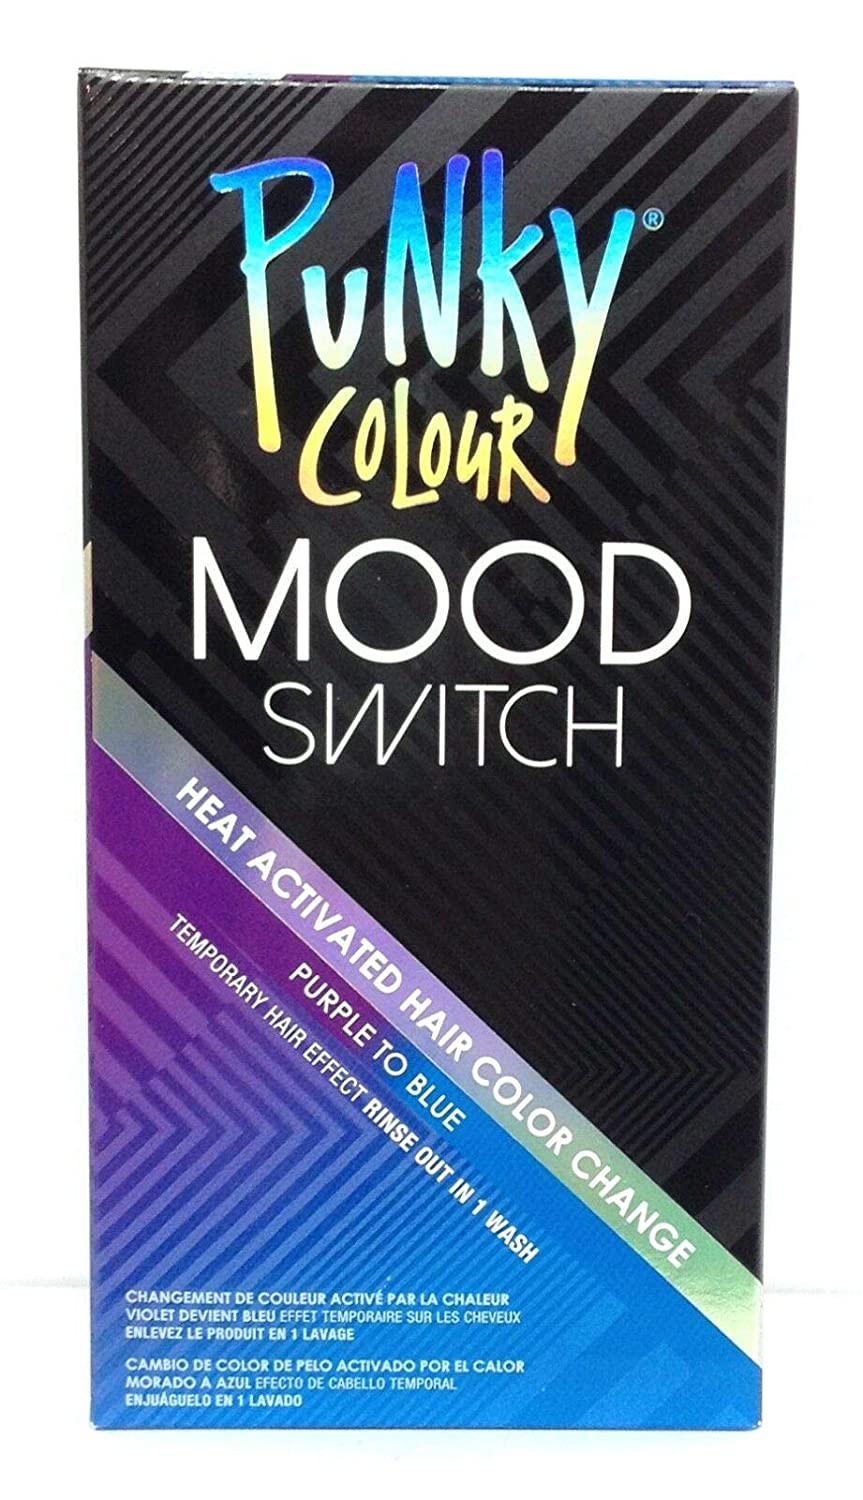 ''Punky Colour Purple To Blue Mood Switch Heat Activated HAIR Color Change, Temporary HAIR Effect''